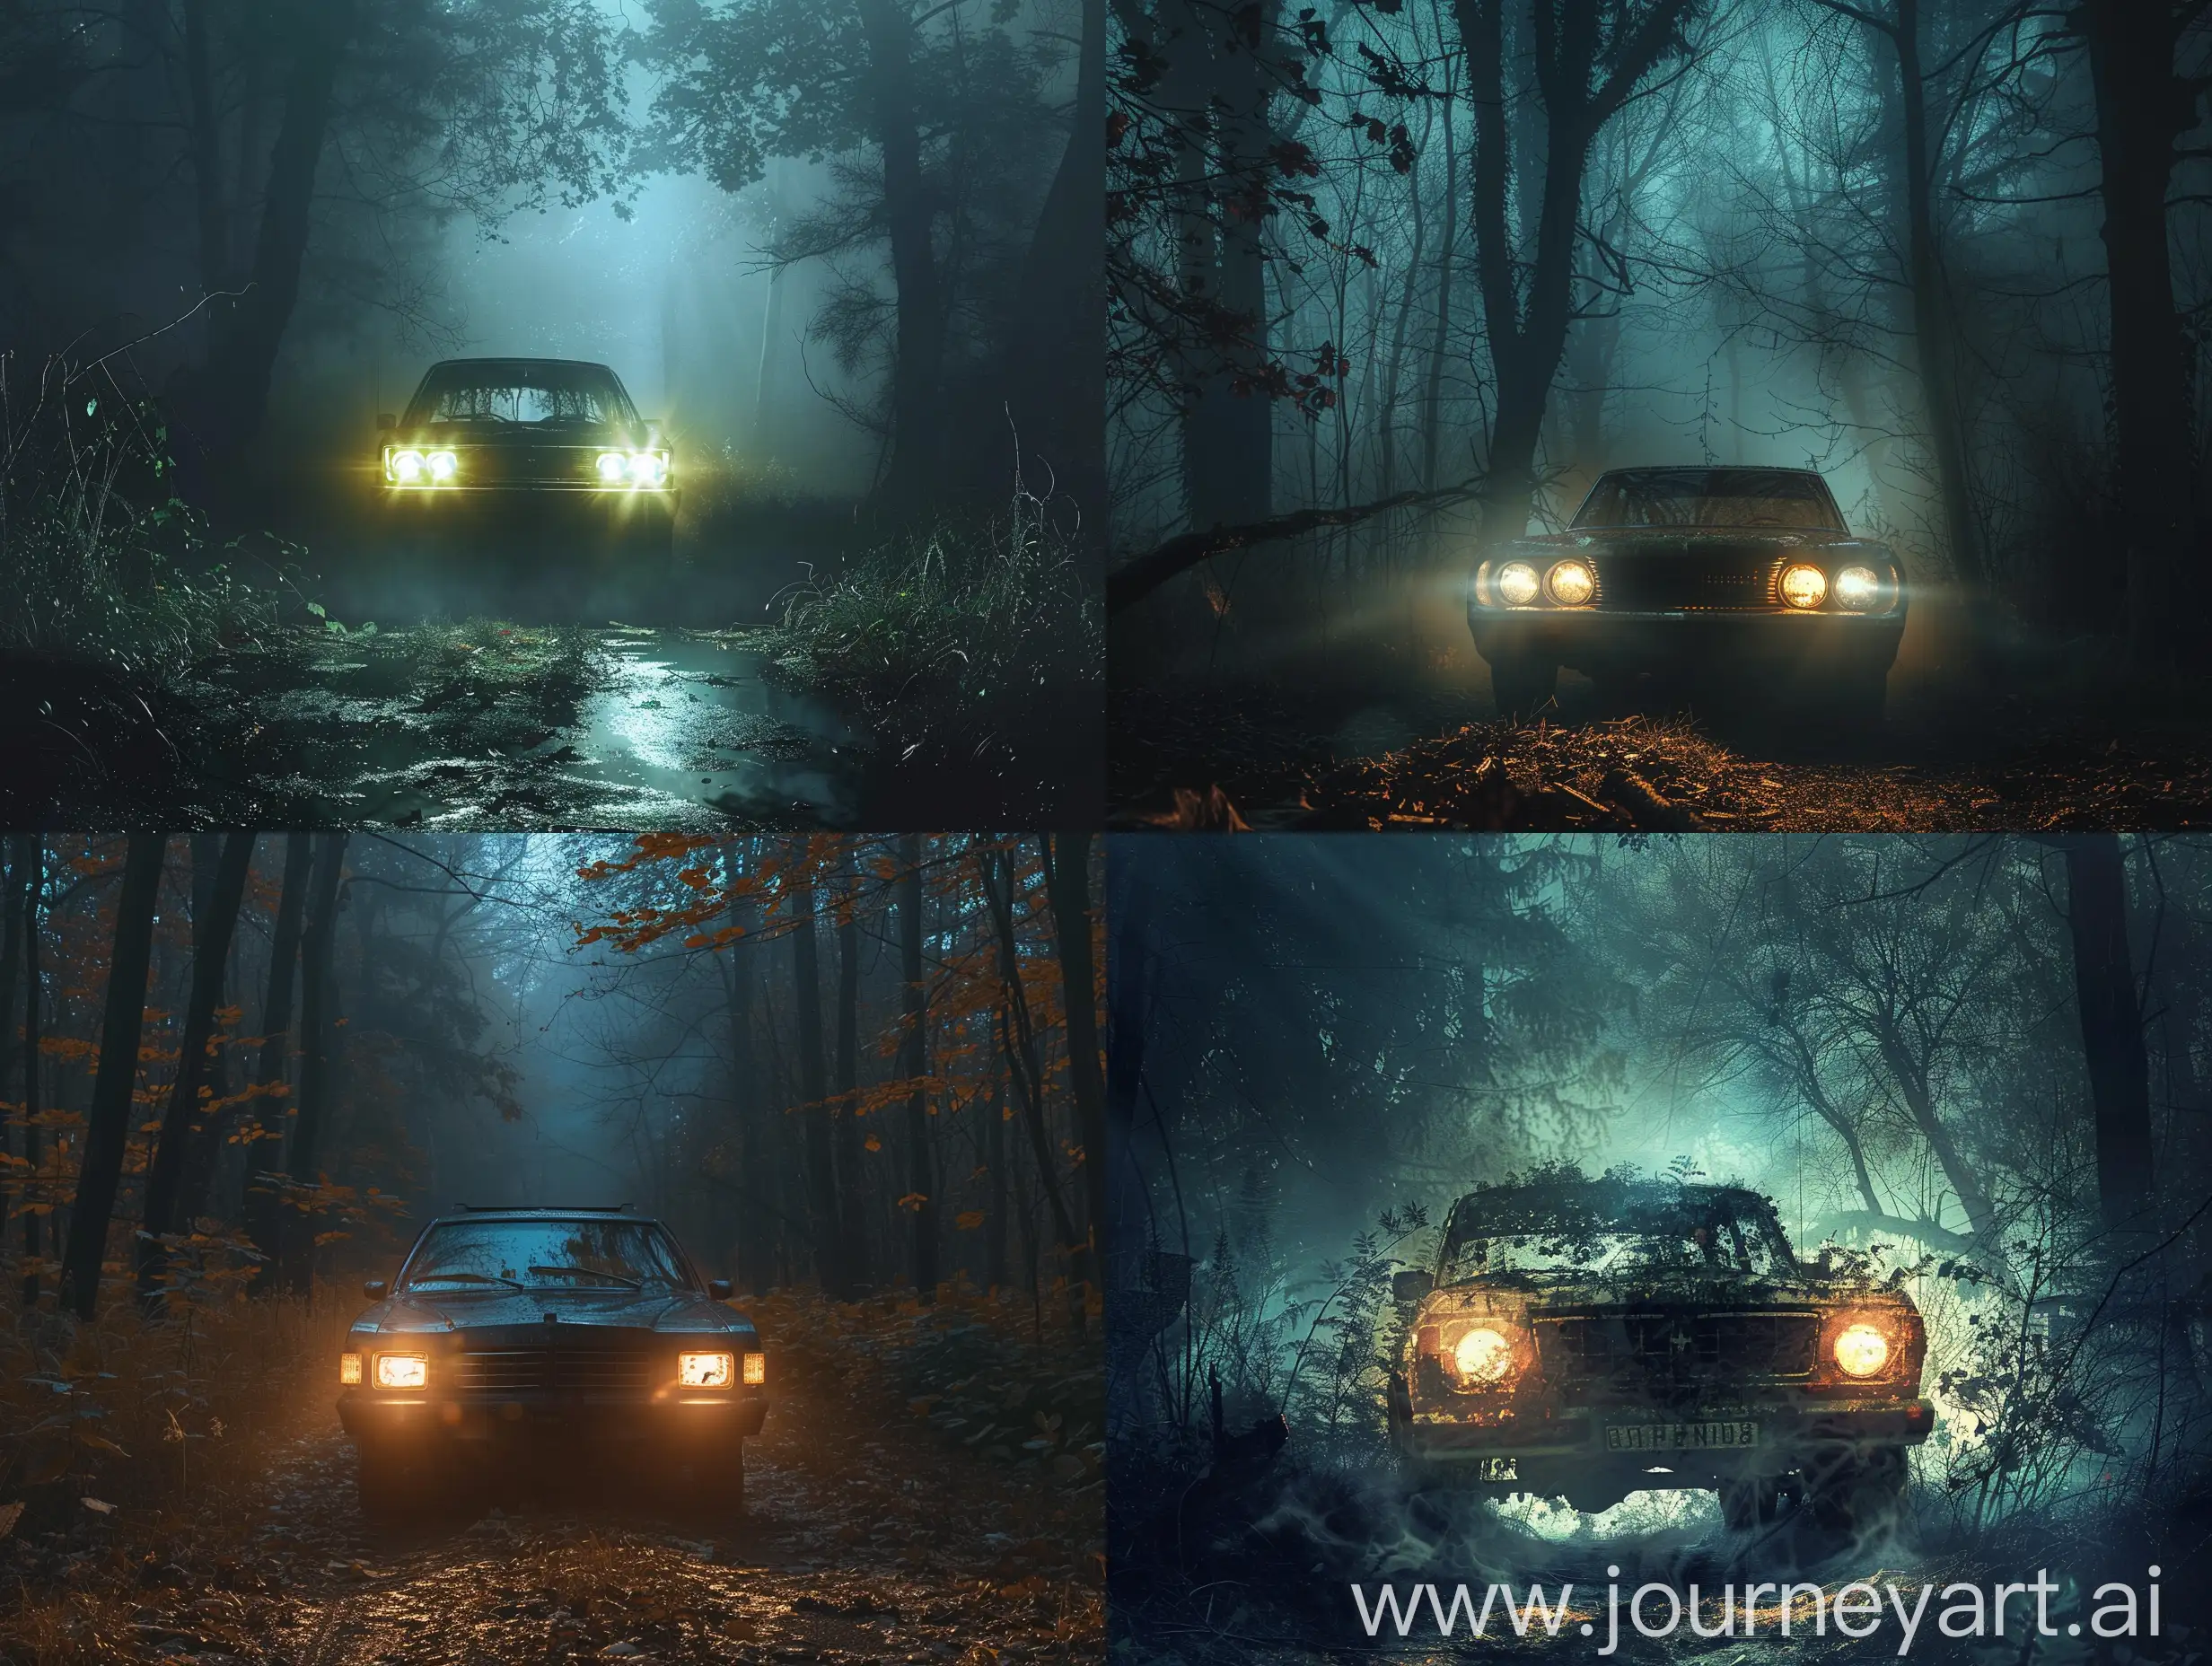 car in the middle of the forest, first person on the solon car, headlights, background, night, horror